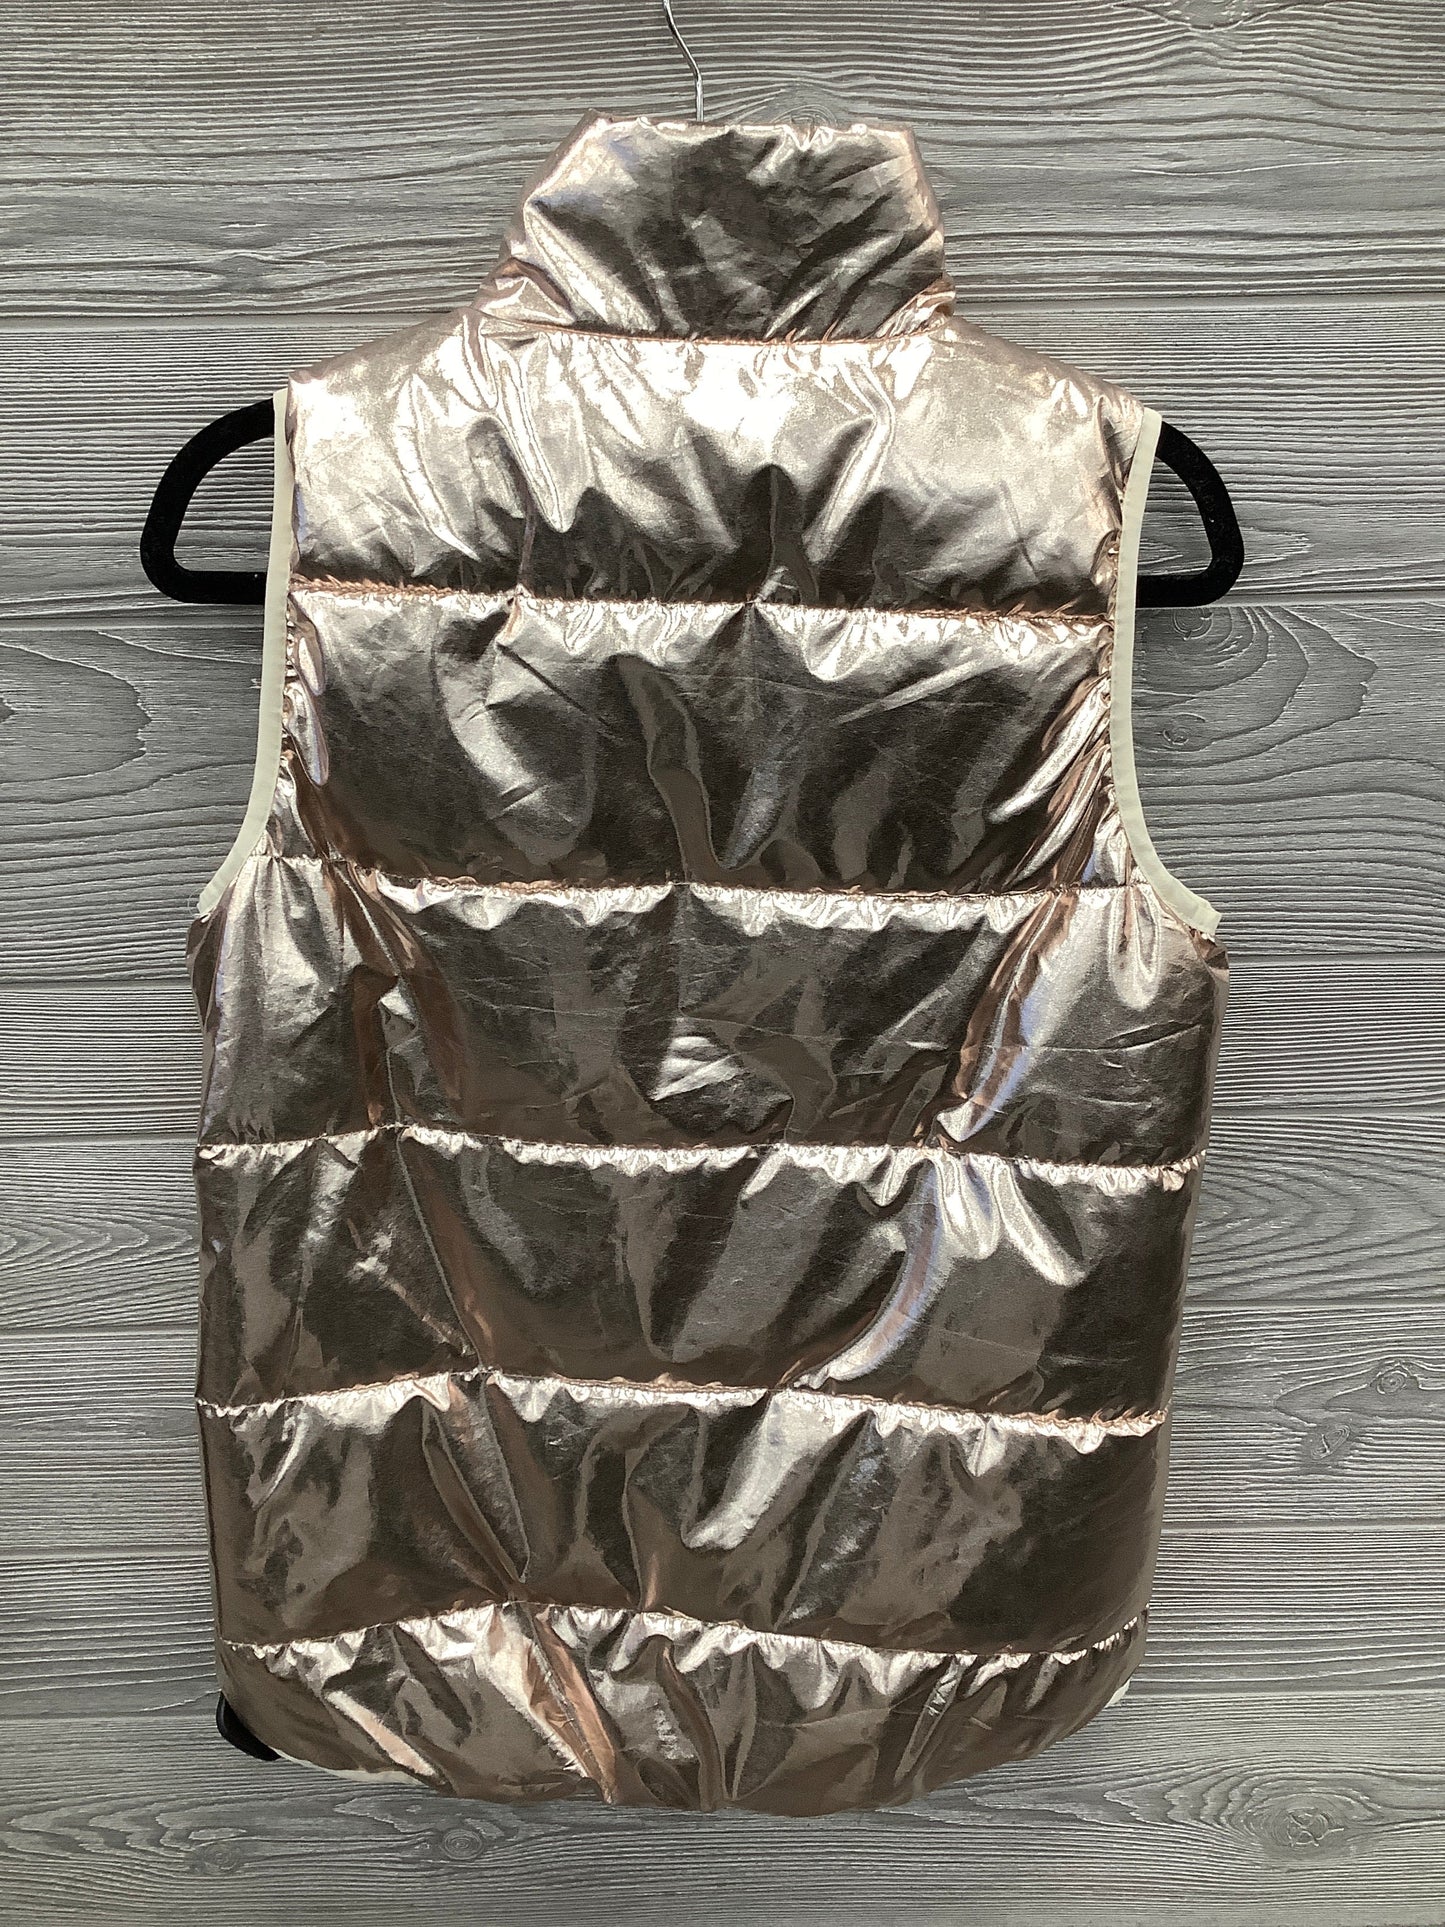 Vest Puffer & Quilted By Xersion  Size: S